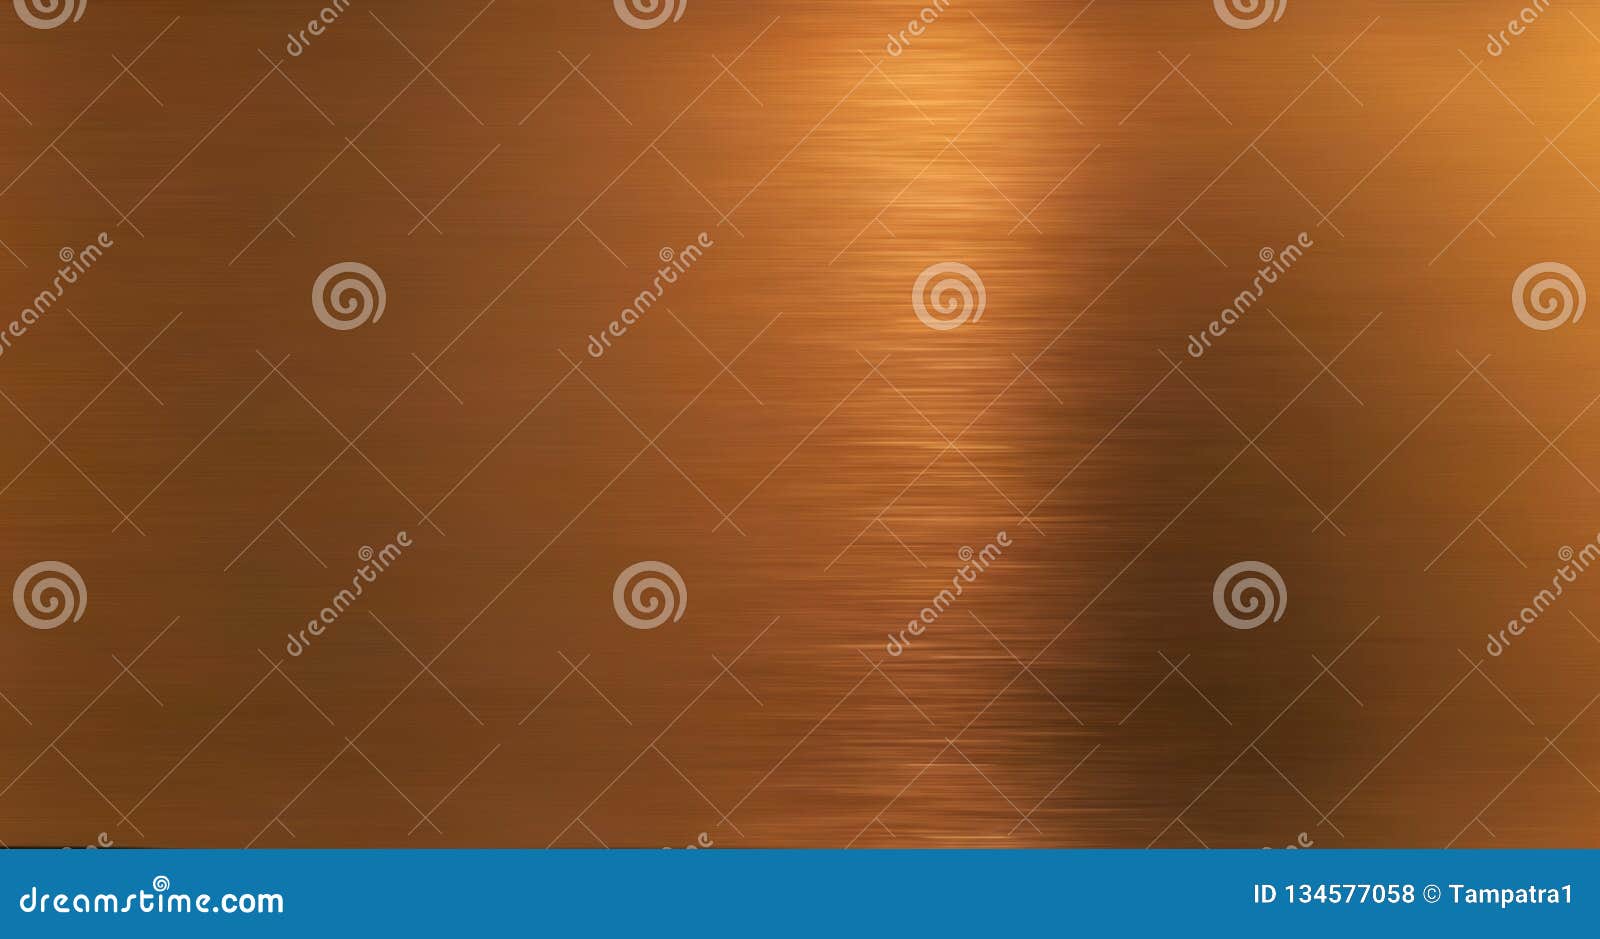 golden hairline stainless. shiny gold foil, bronze, or copper metal pattern surface texture. close-up of interior material for